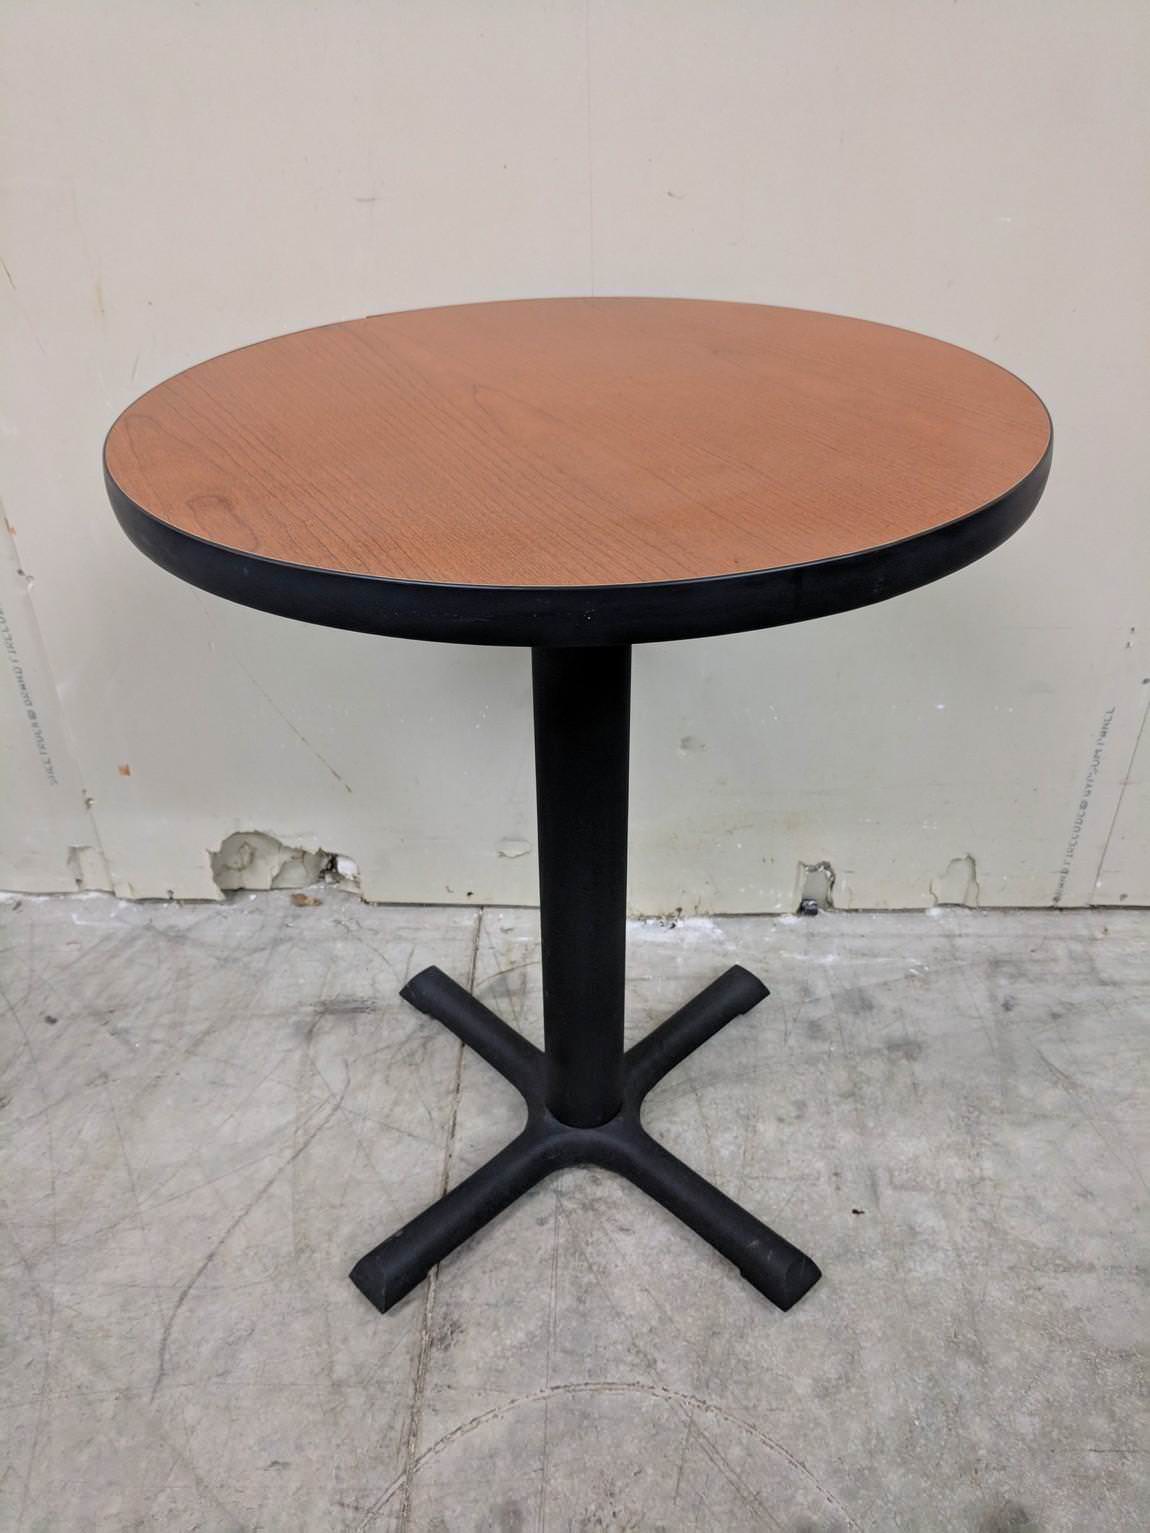 Round Cherry Laminate Table – 24 Inch Wide